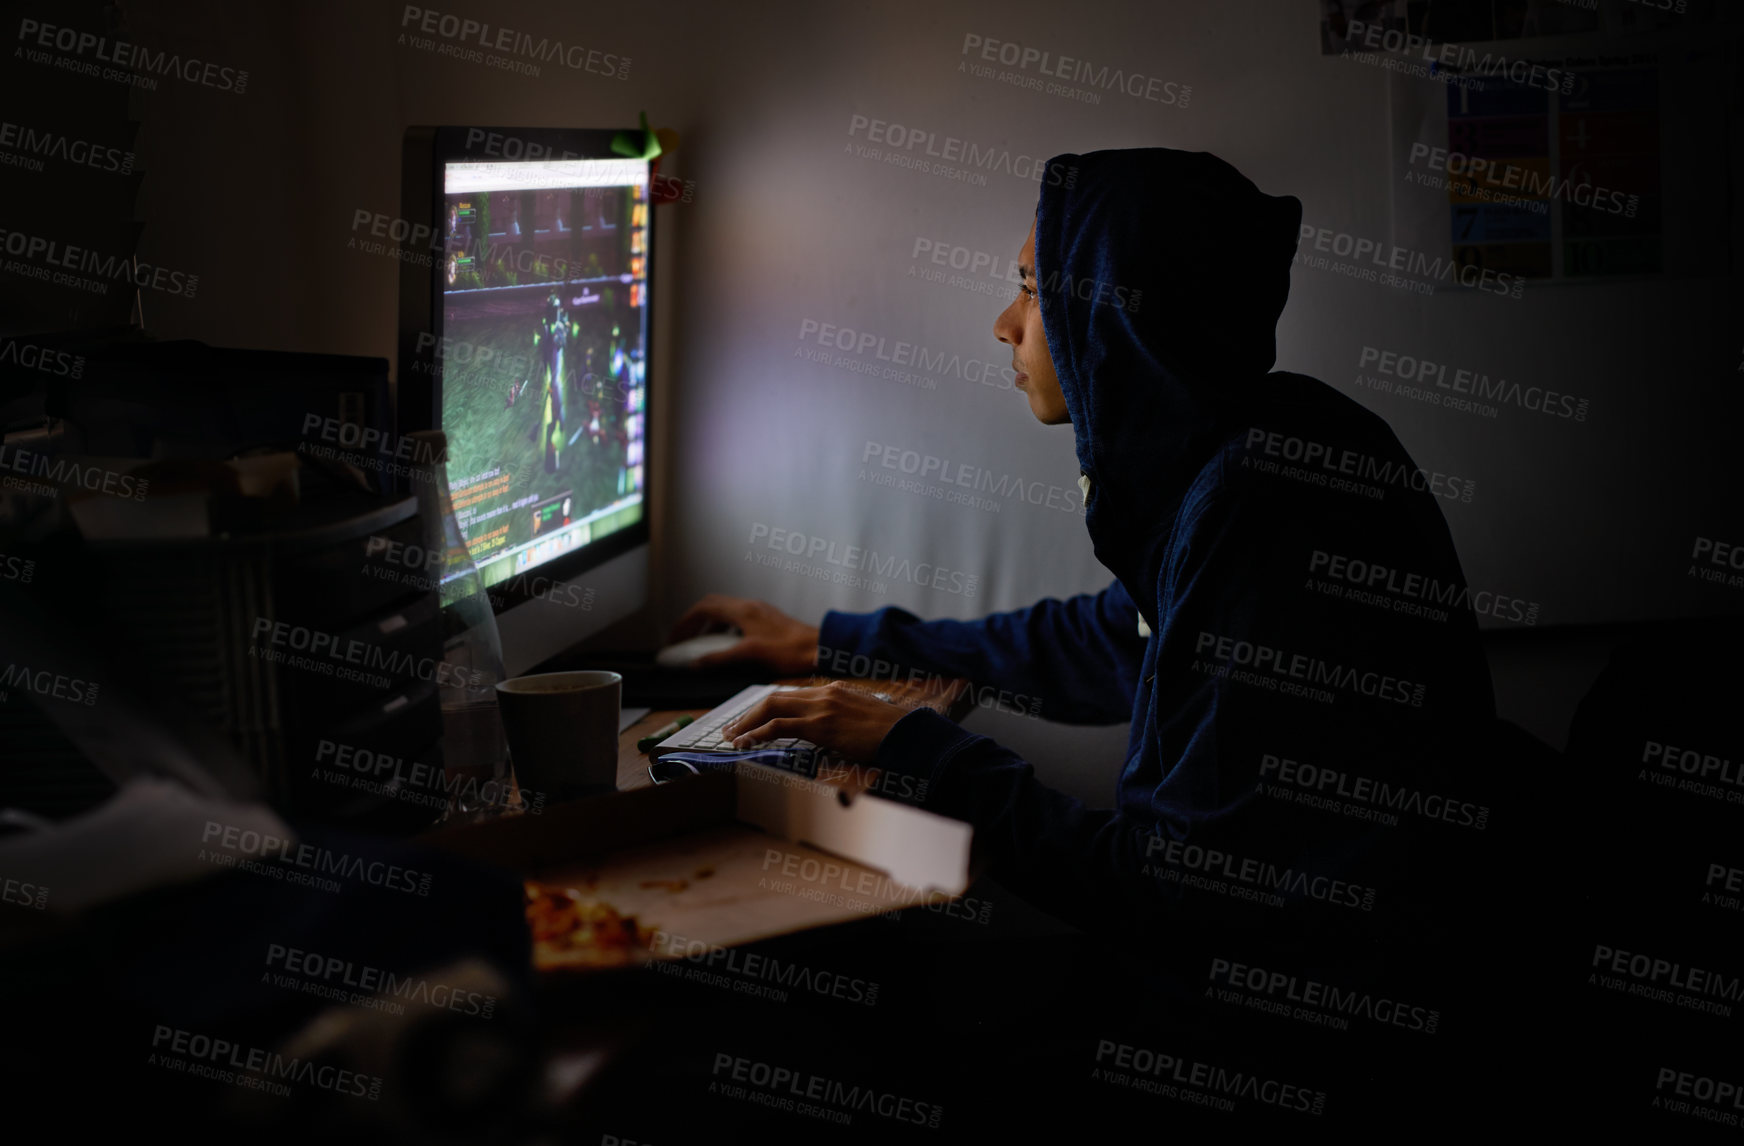 Buy stock photo Cropped shot of a young programmer focused on his work